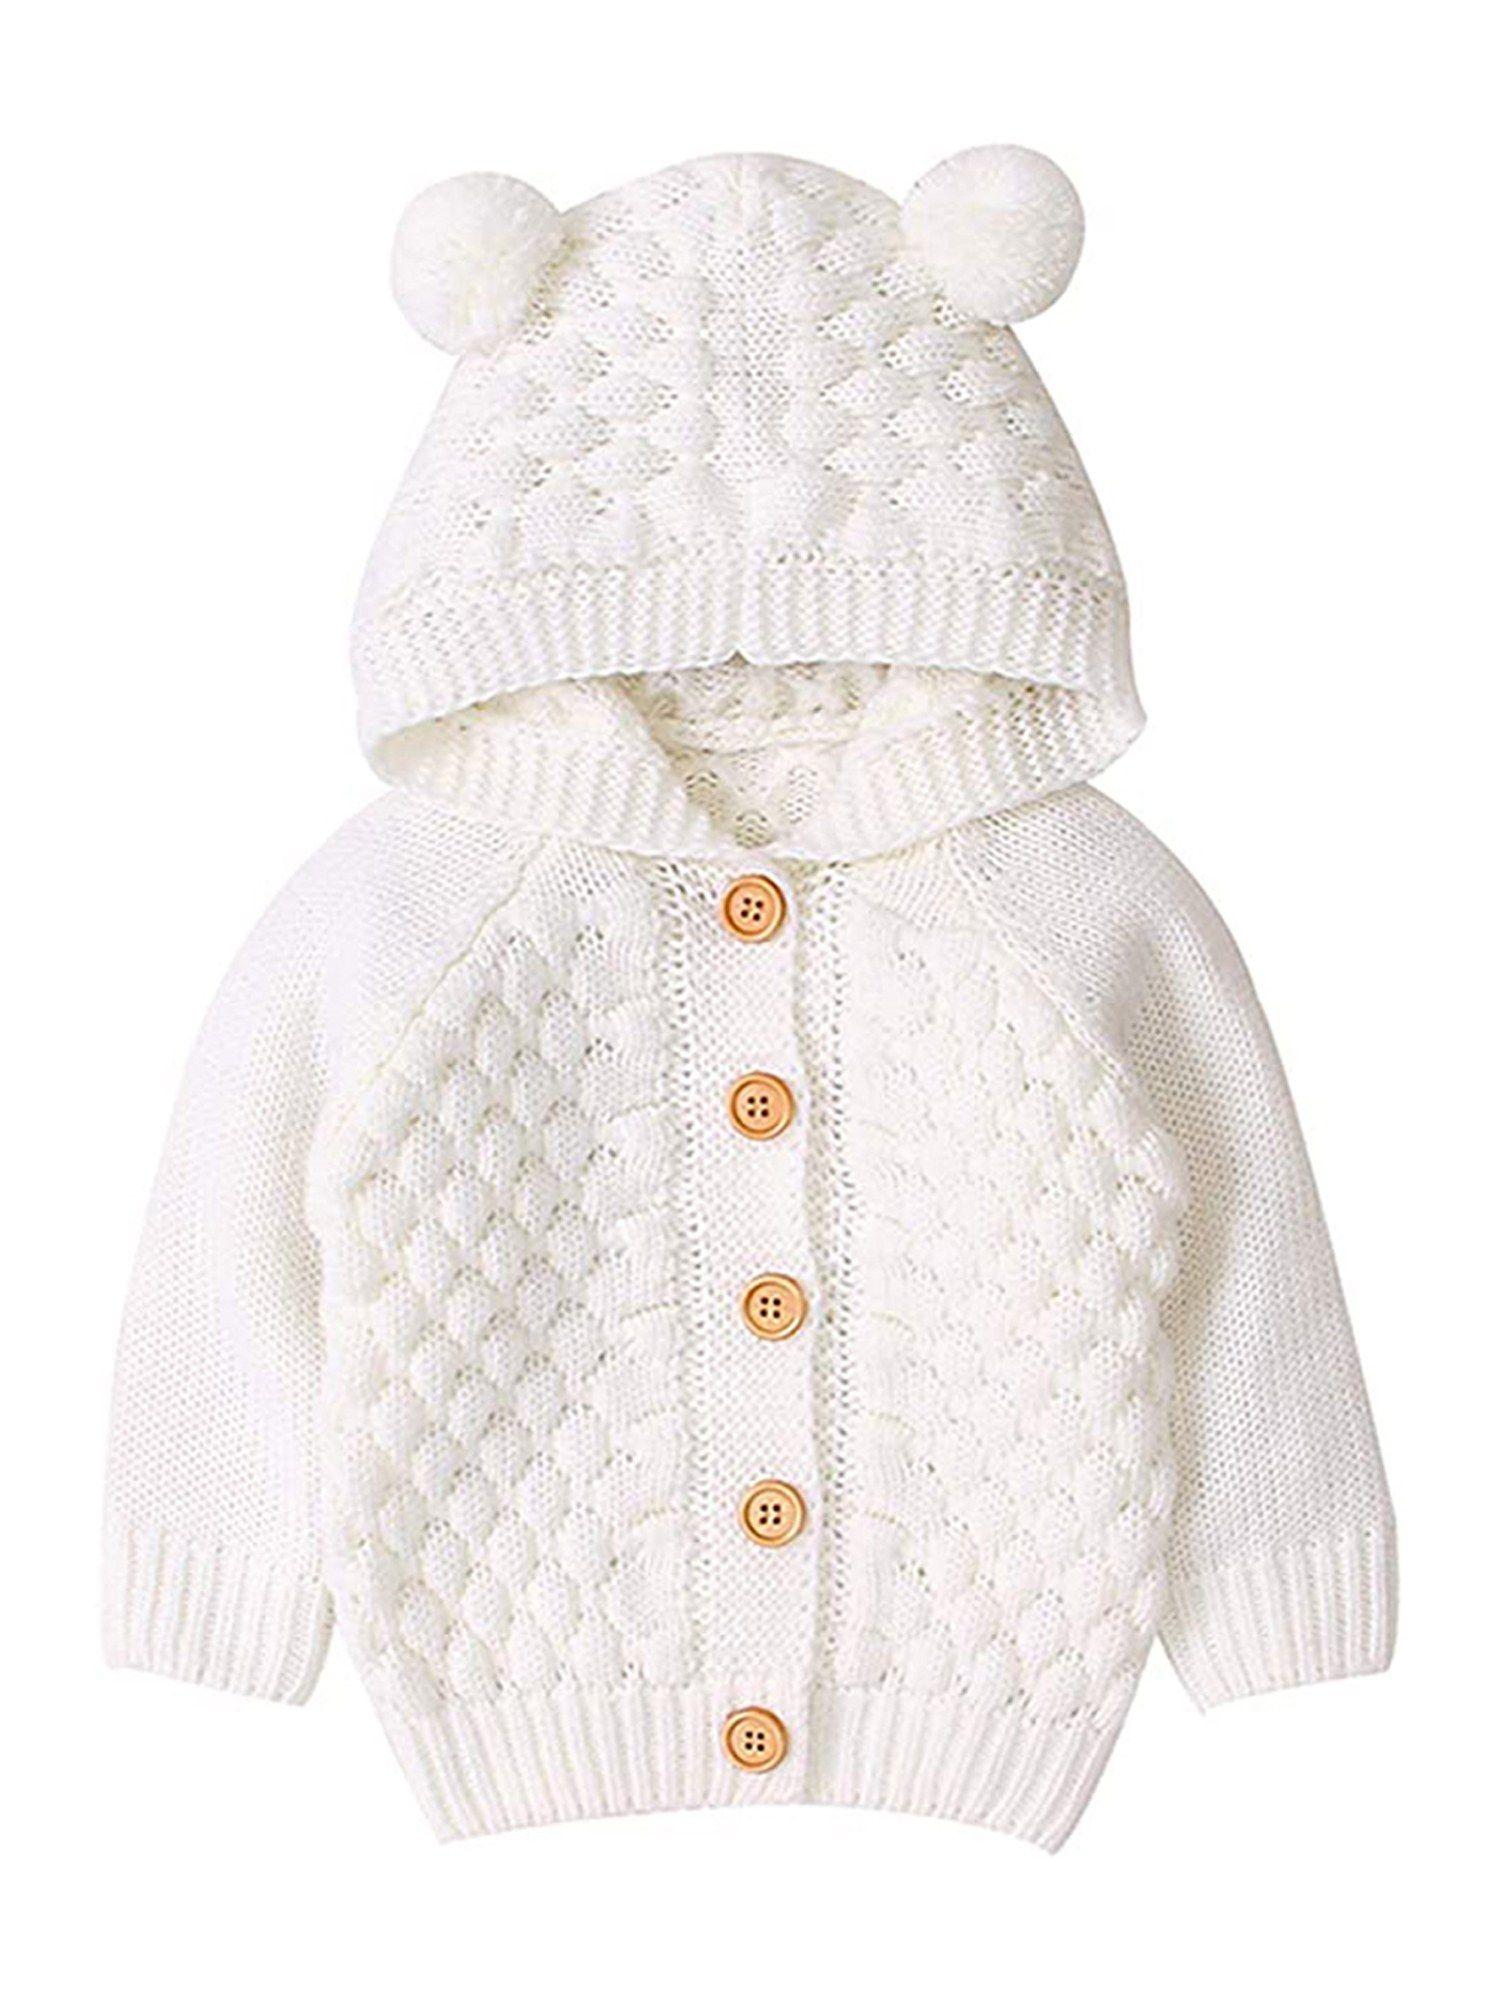 infants ivory white knitted cardigan sweater with pom pom hoodie